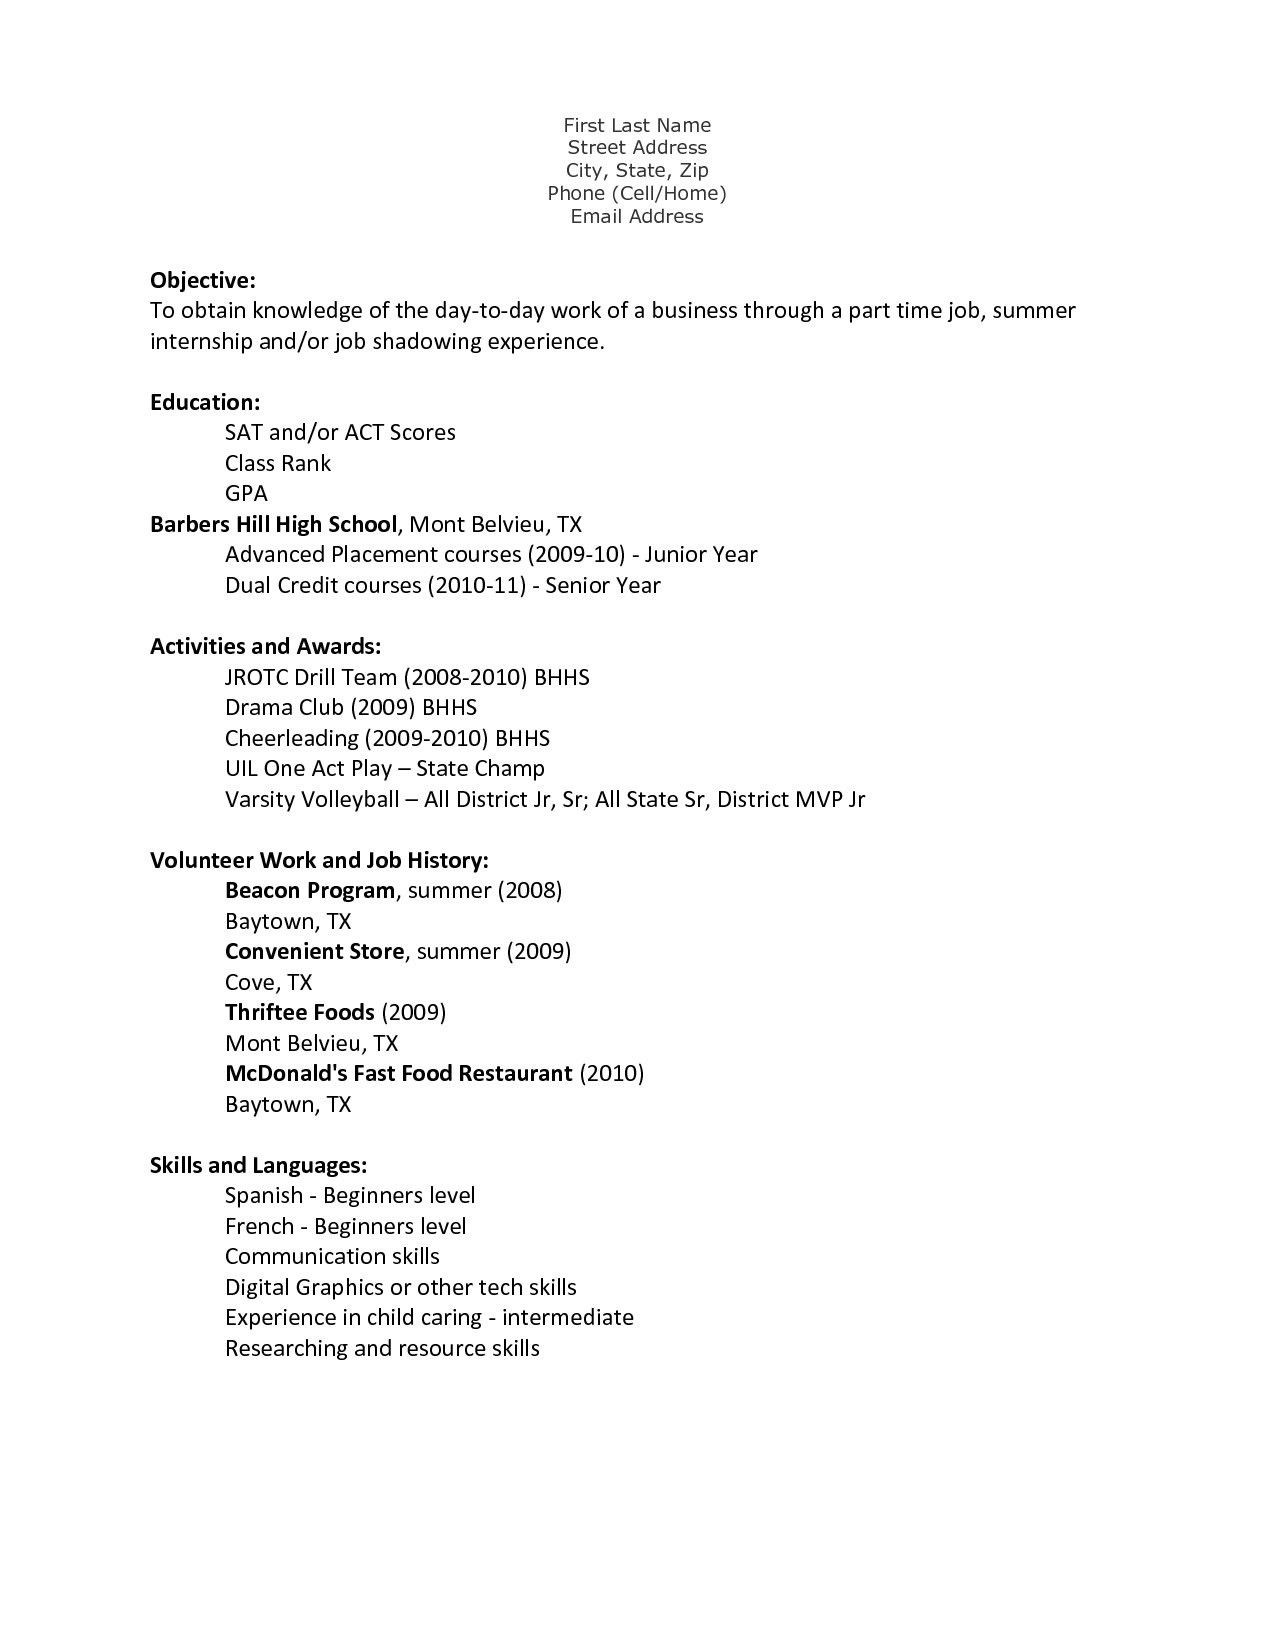 Resume Template for First Job Teenager Pin On 4-resume Examples